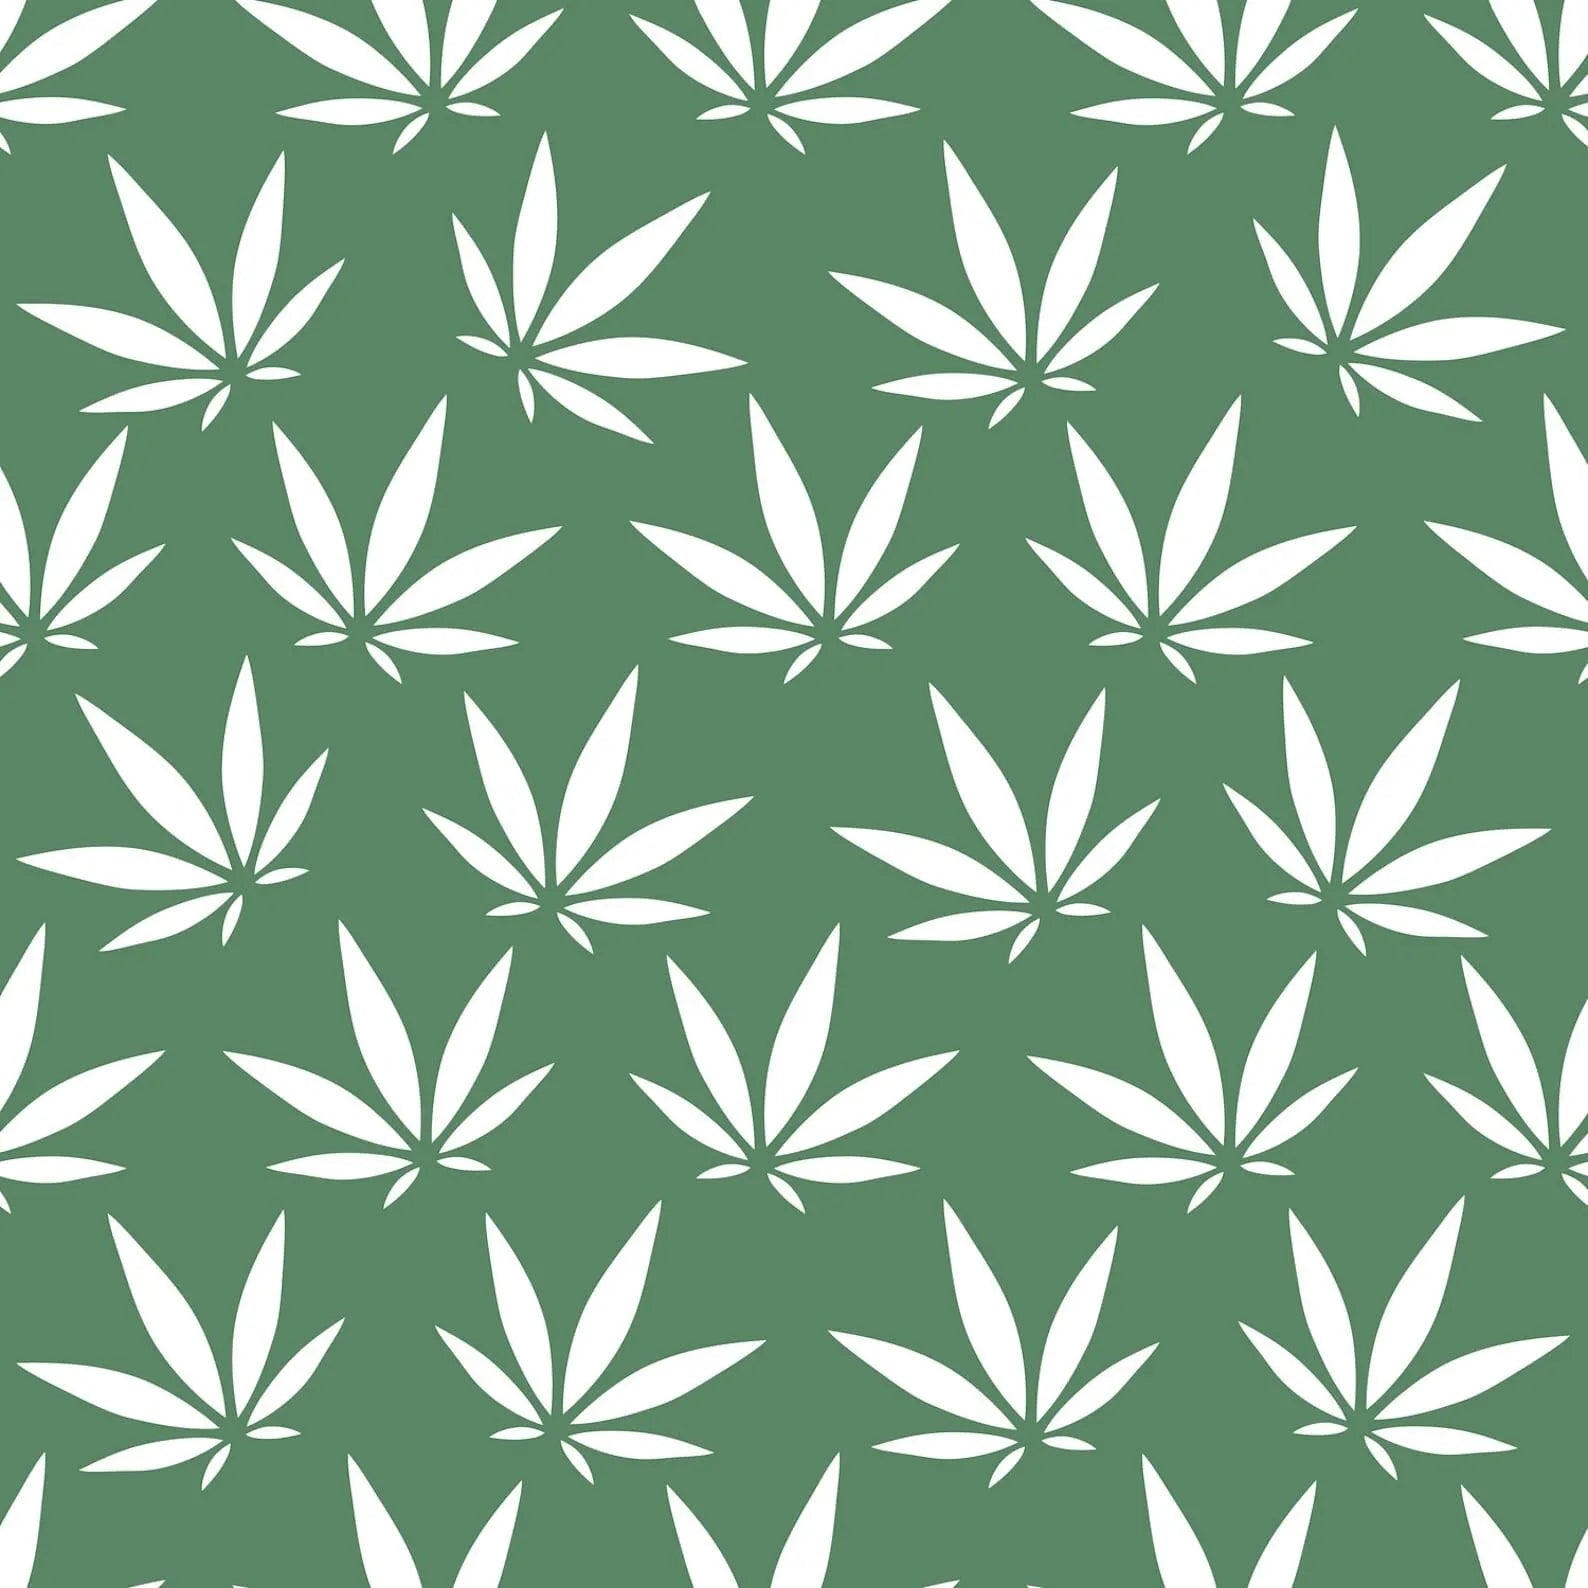 Cannabis Gift Wrap- Set of 3 - Wrapping Paper Sheets